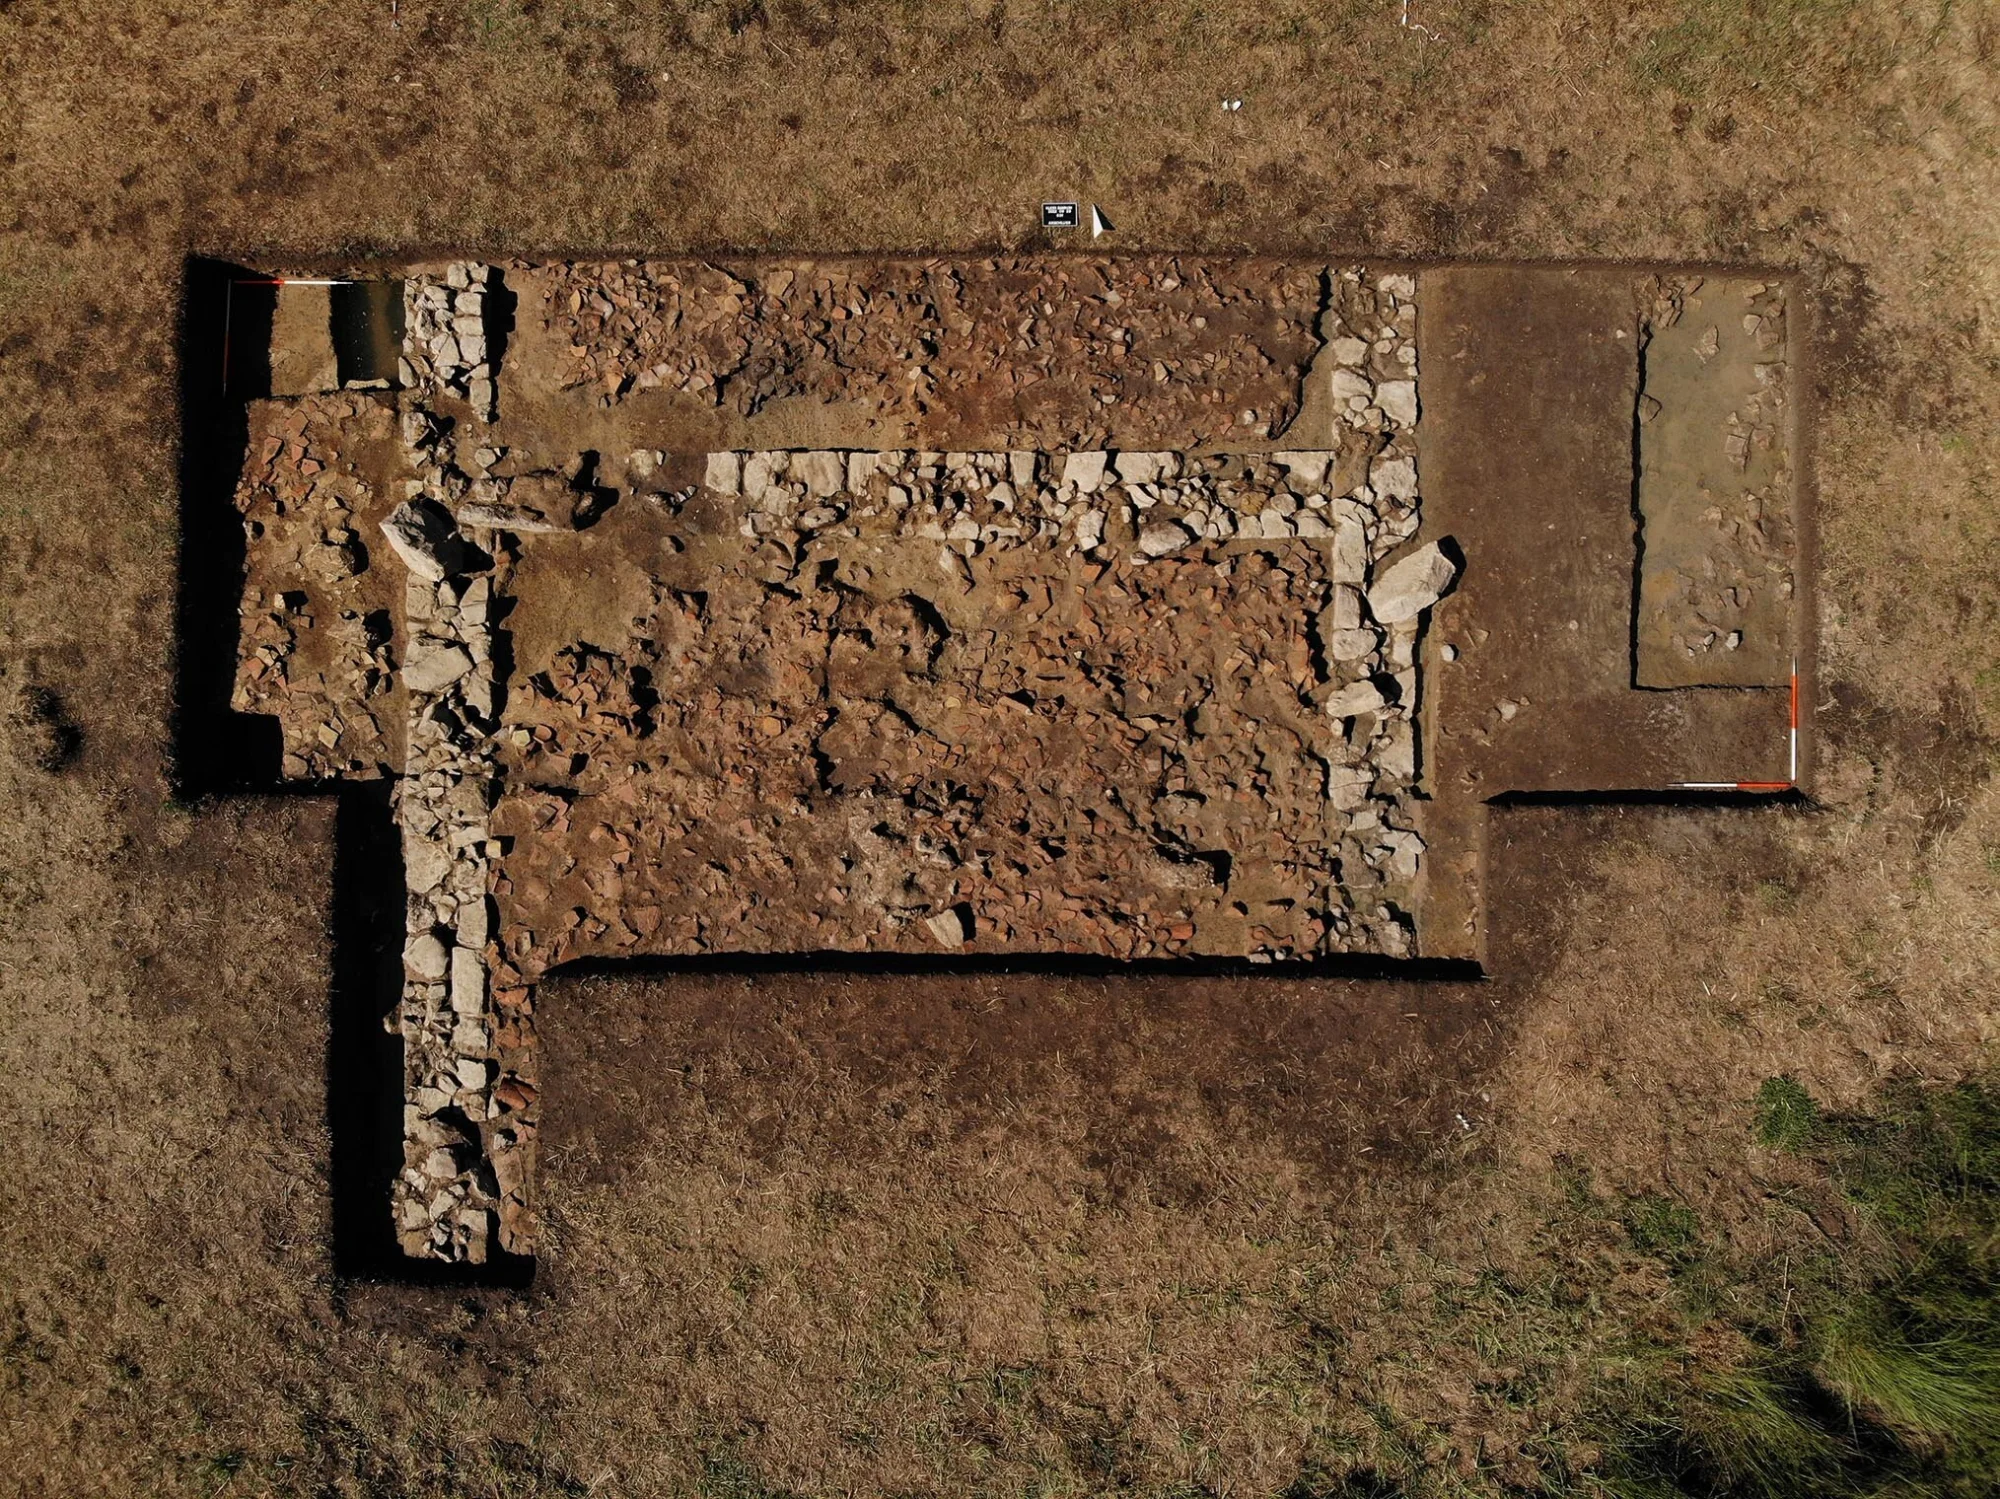 The remains of a structure believed to be the temple of Poseidon at the Kleidi site near Samikon, Greece, 2022.